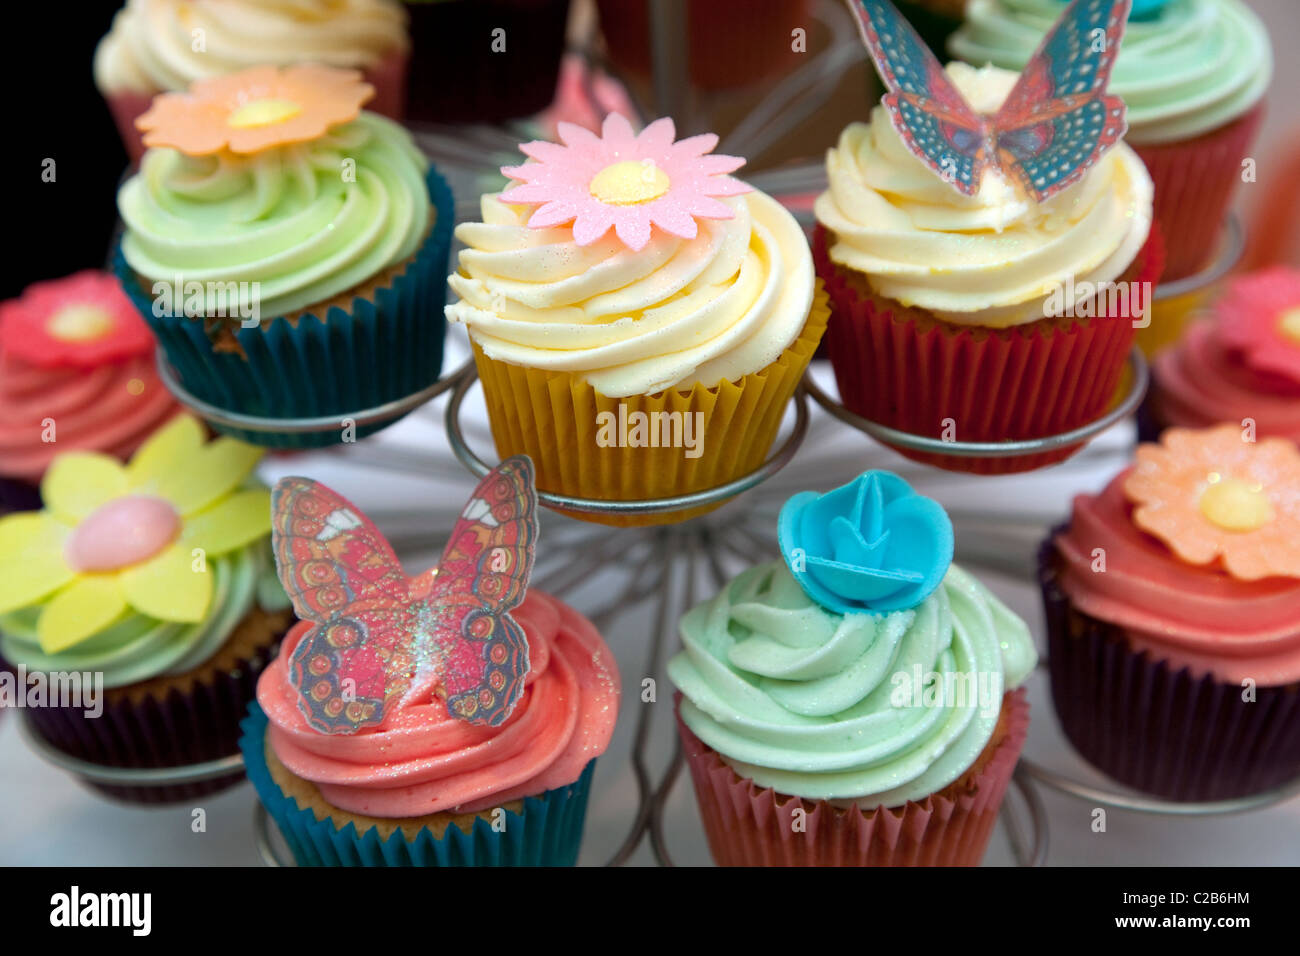 Cupcakes with decorations, London Stock Photo